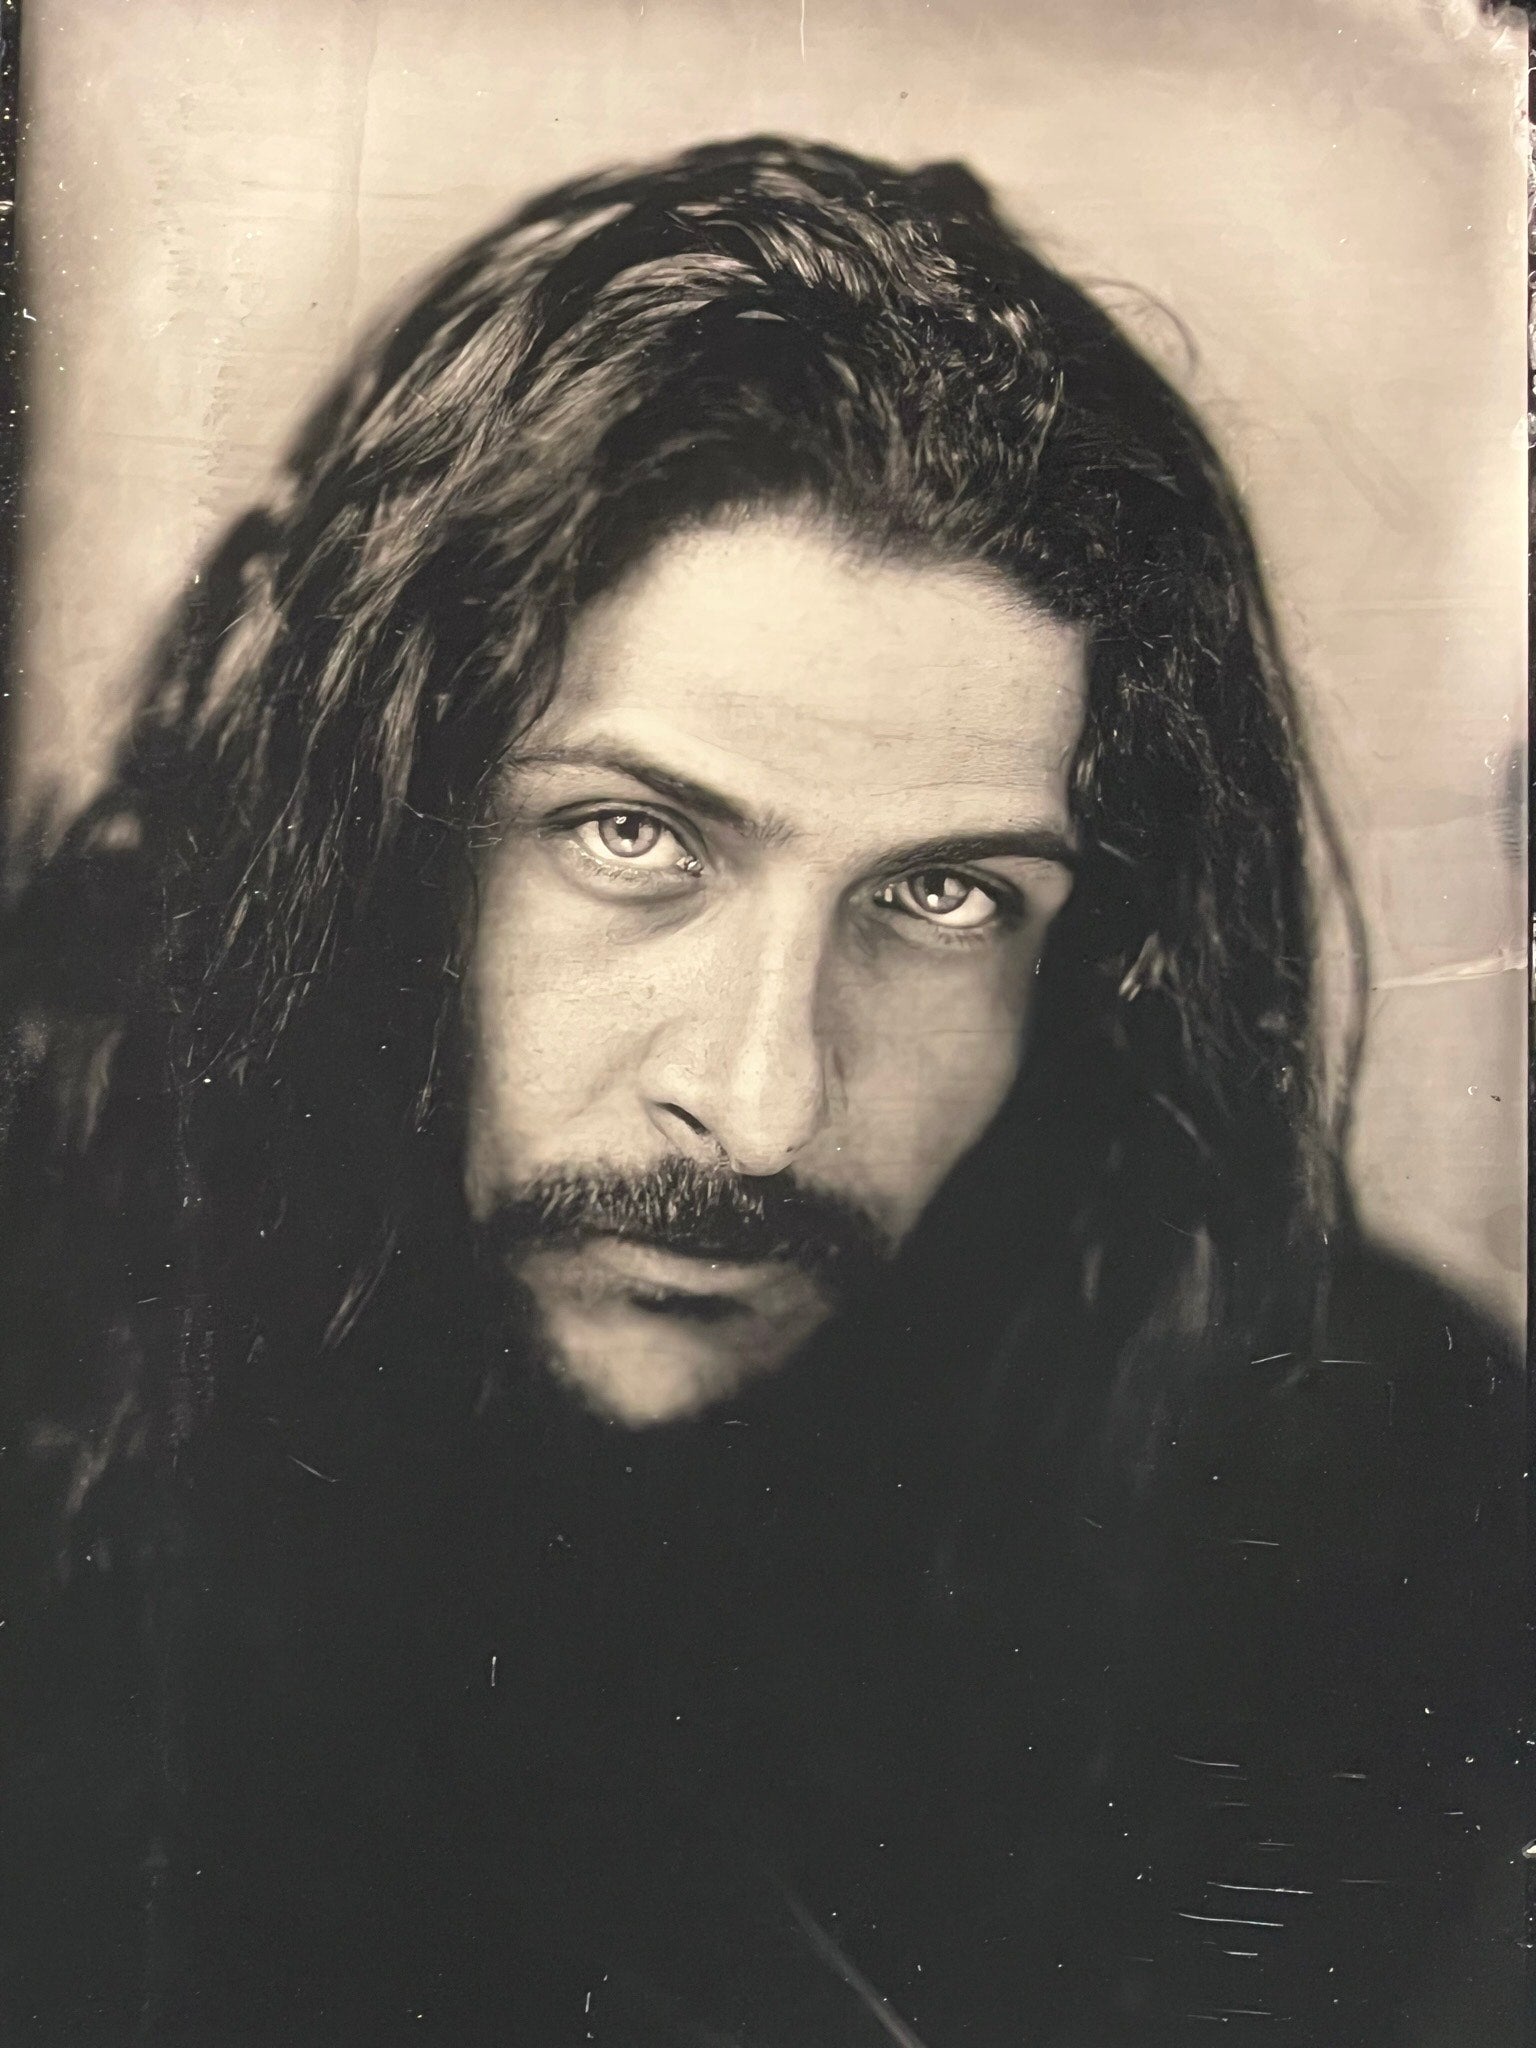 A black-and-white tintype photo of a man with long hair and a facial hair, staring solemnly into the camera.